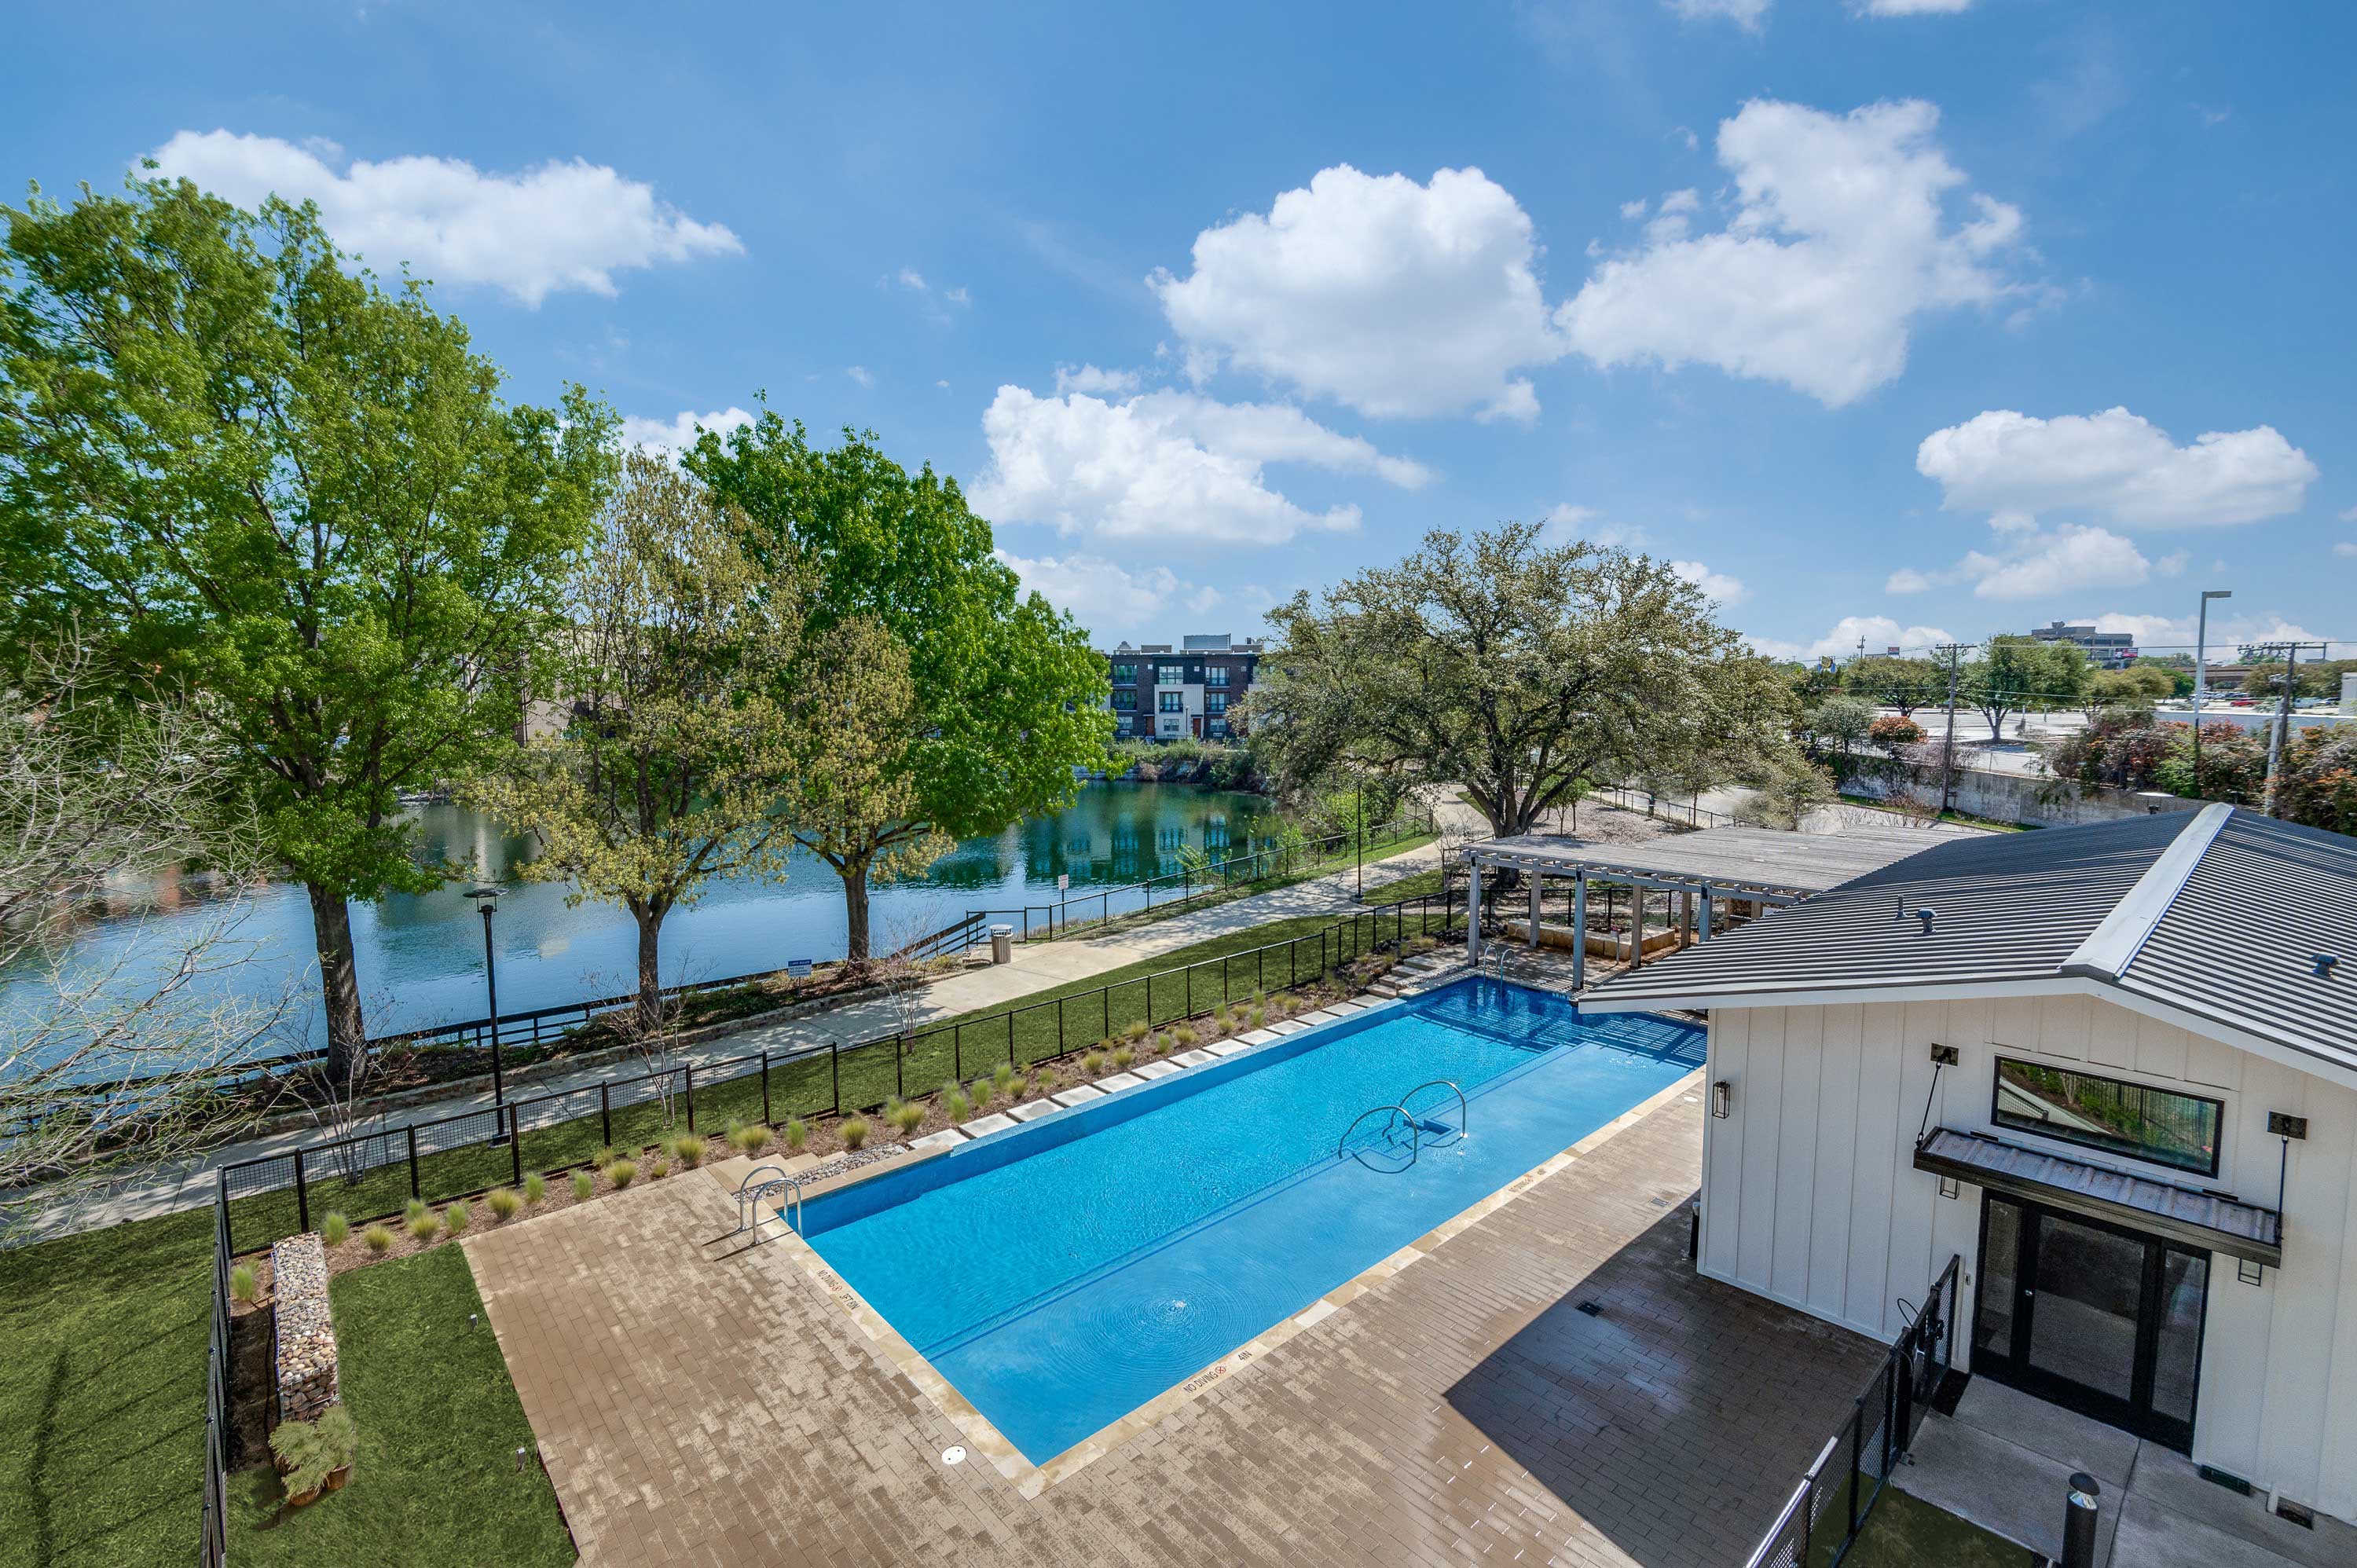 Infinity Edge Pool overlooking 2-Acre Blue Lake at Midway Row House in North Dallas.